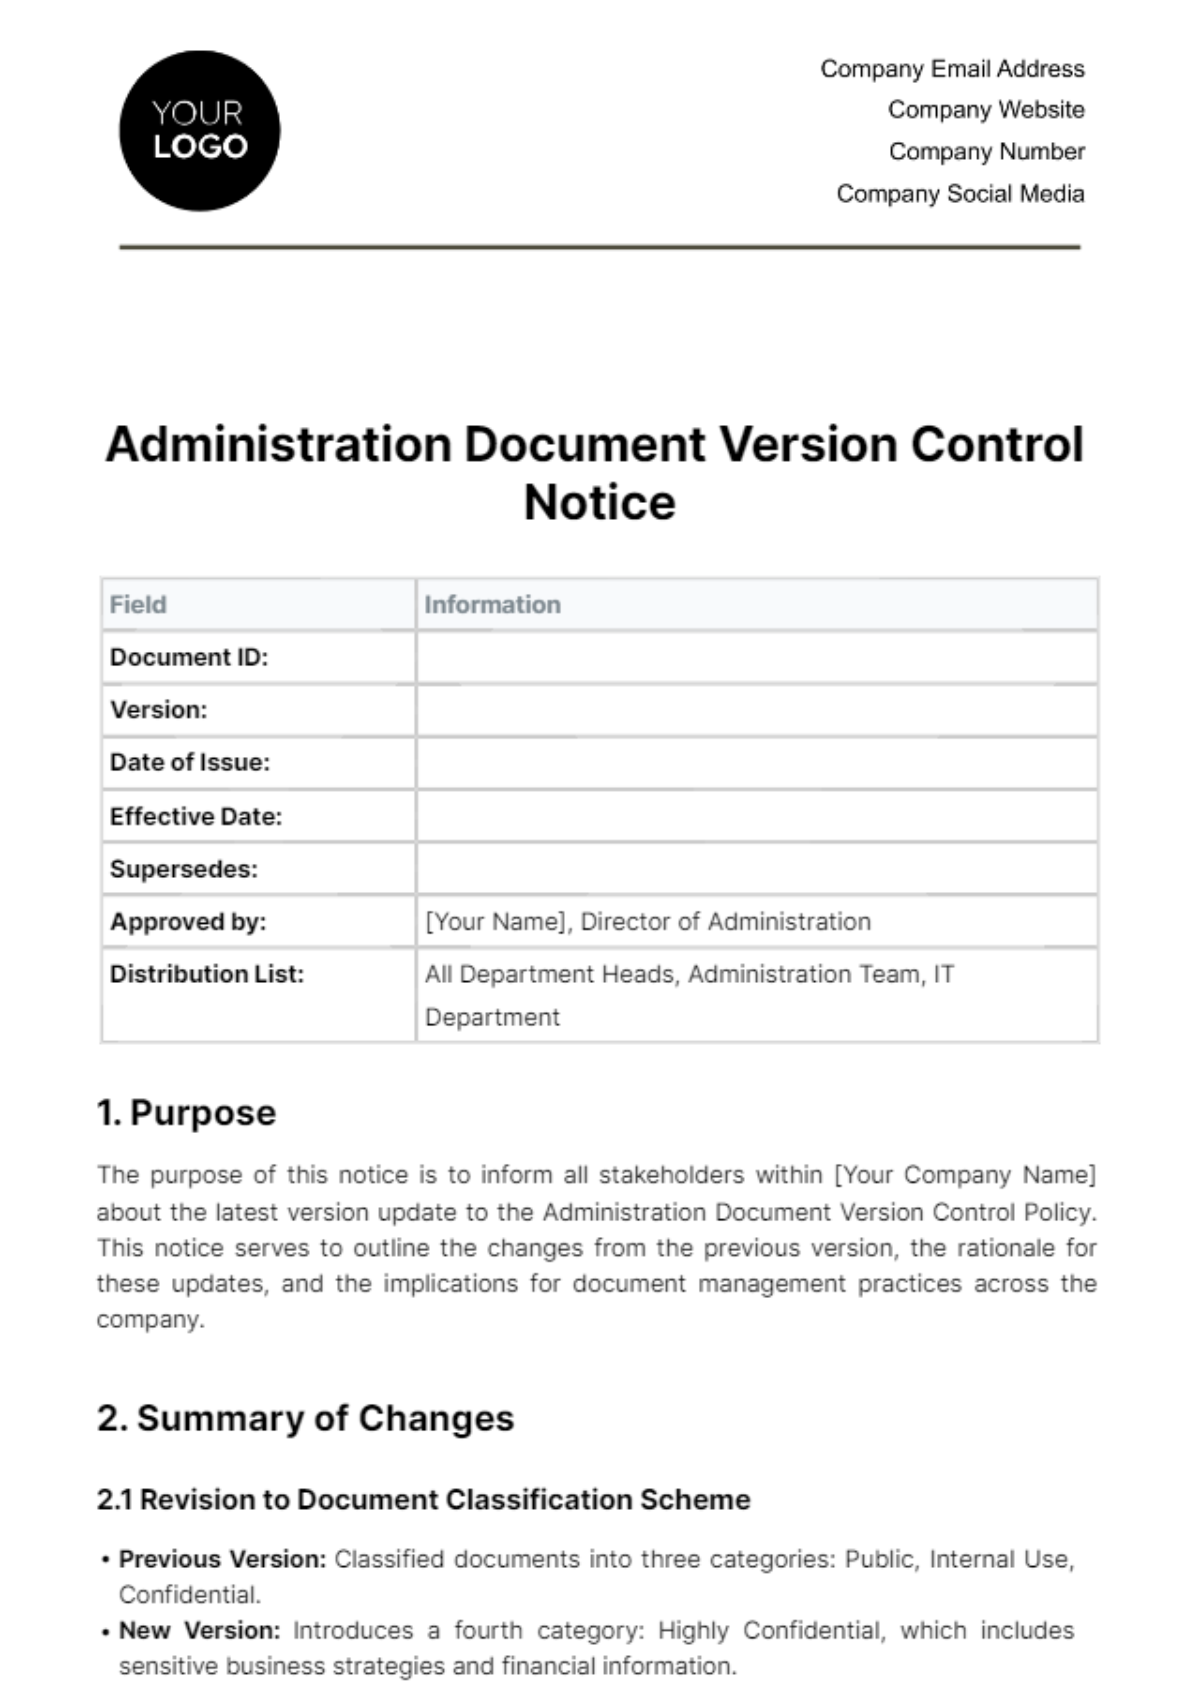 Administration Document Version Control Notice Template